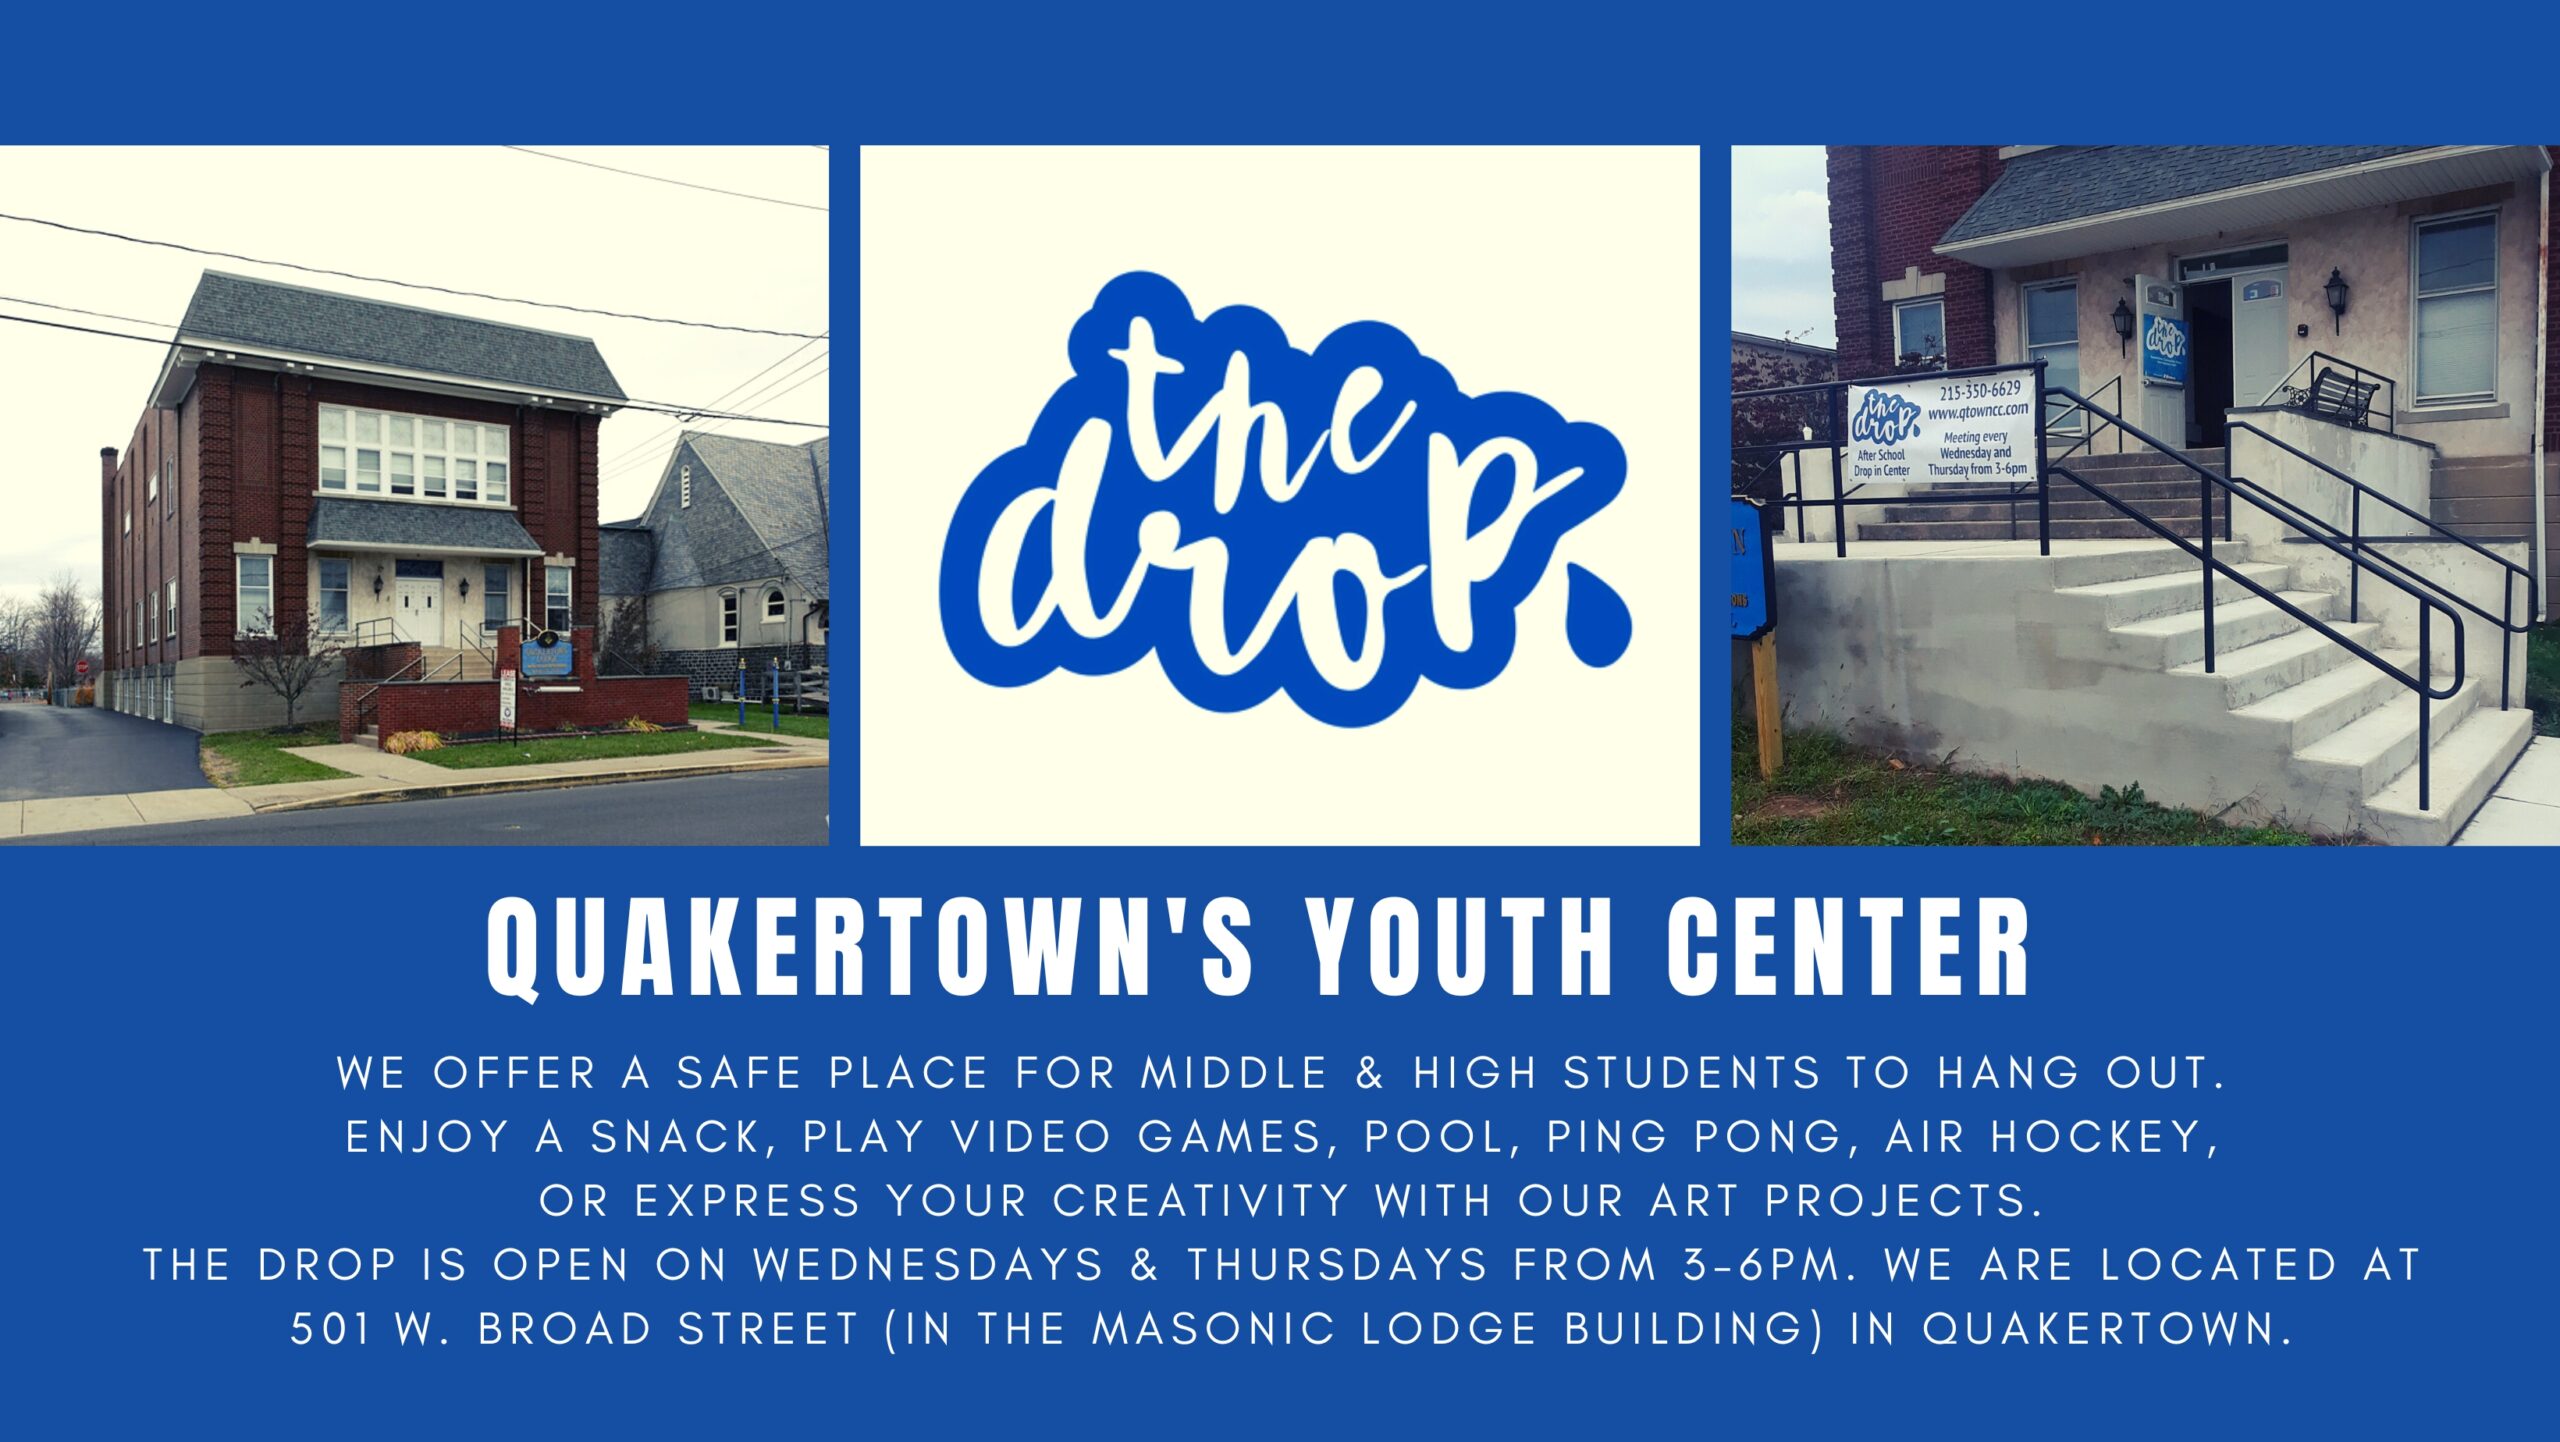 Quakertown's Youth Center